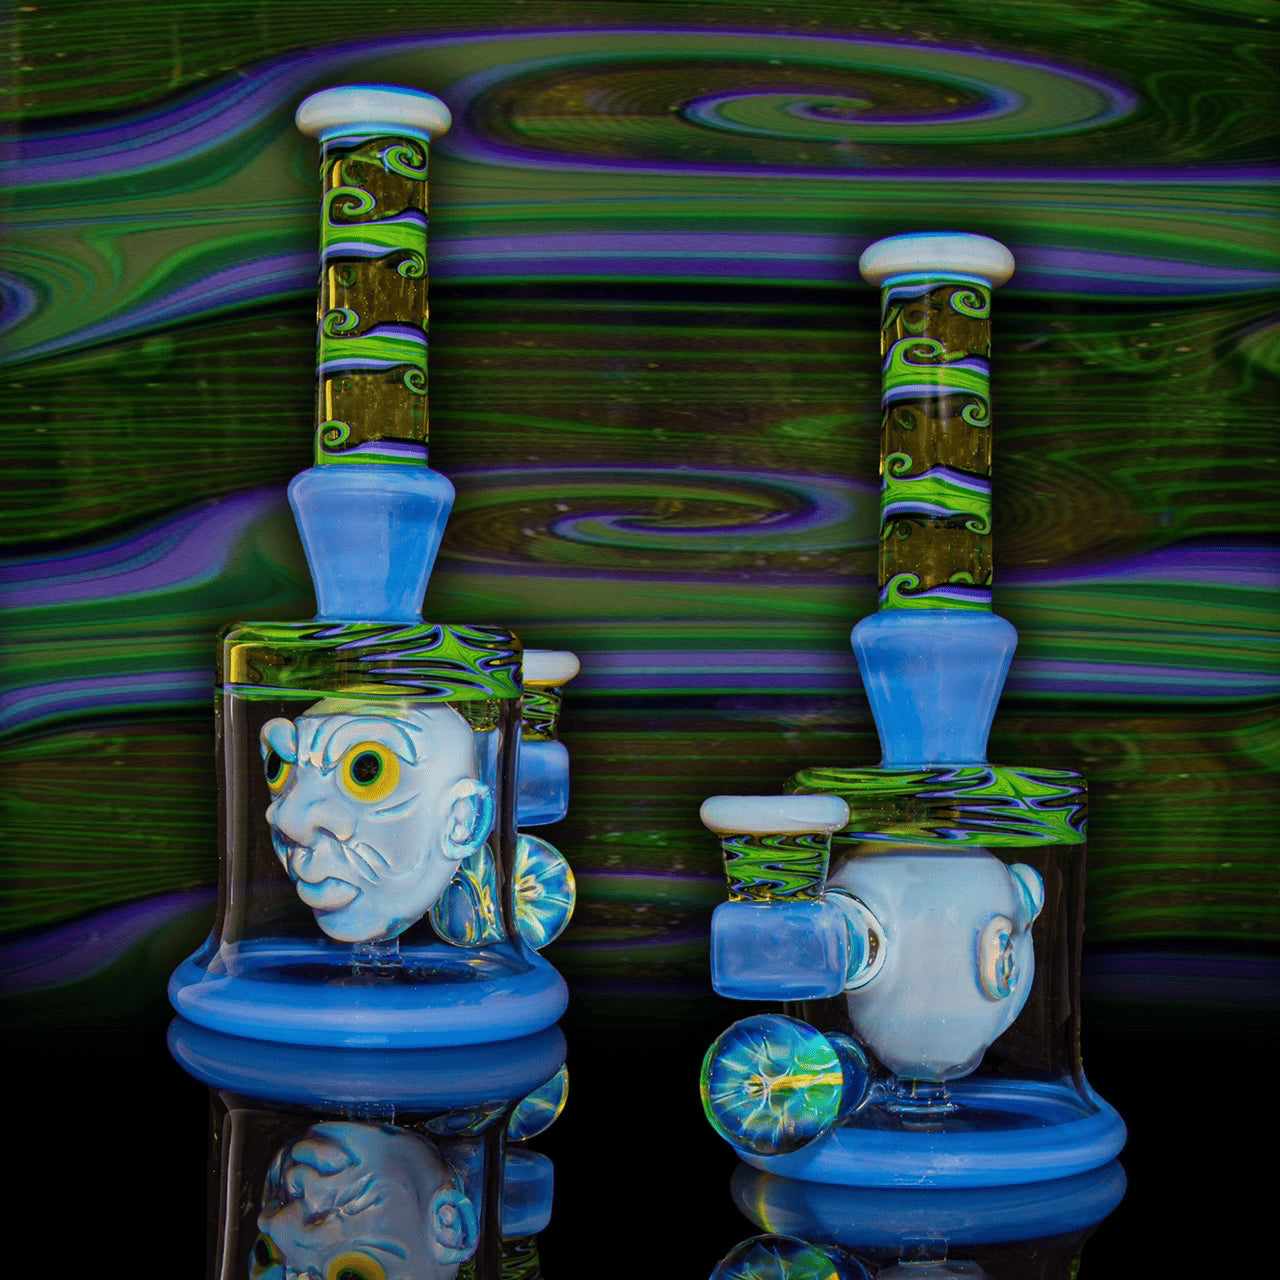 exquisite art piece - Head In A Bottle Collaboration by Mr. Voorhees x Leks Eno